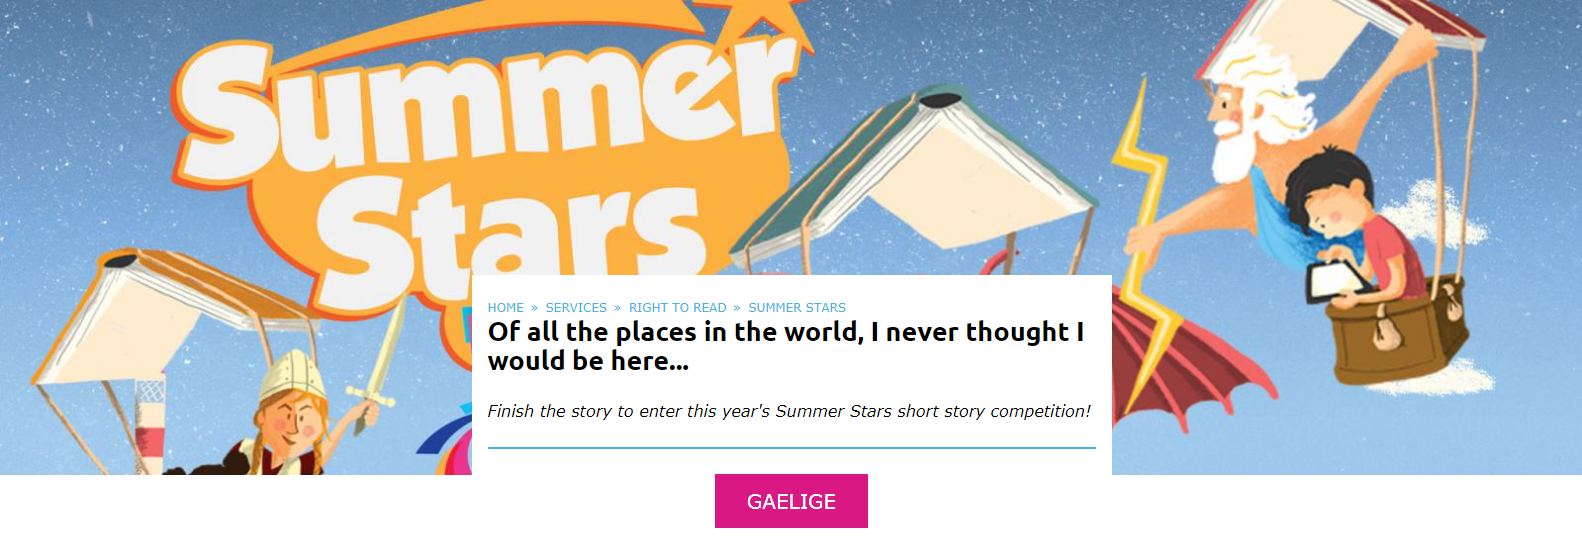 Summer Stars short story competition